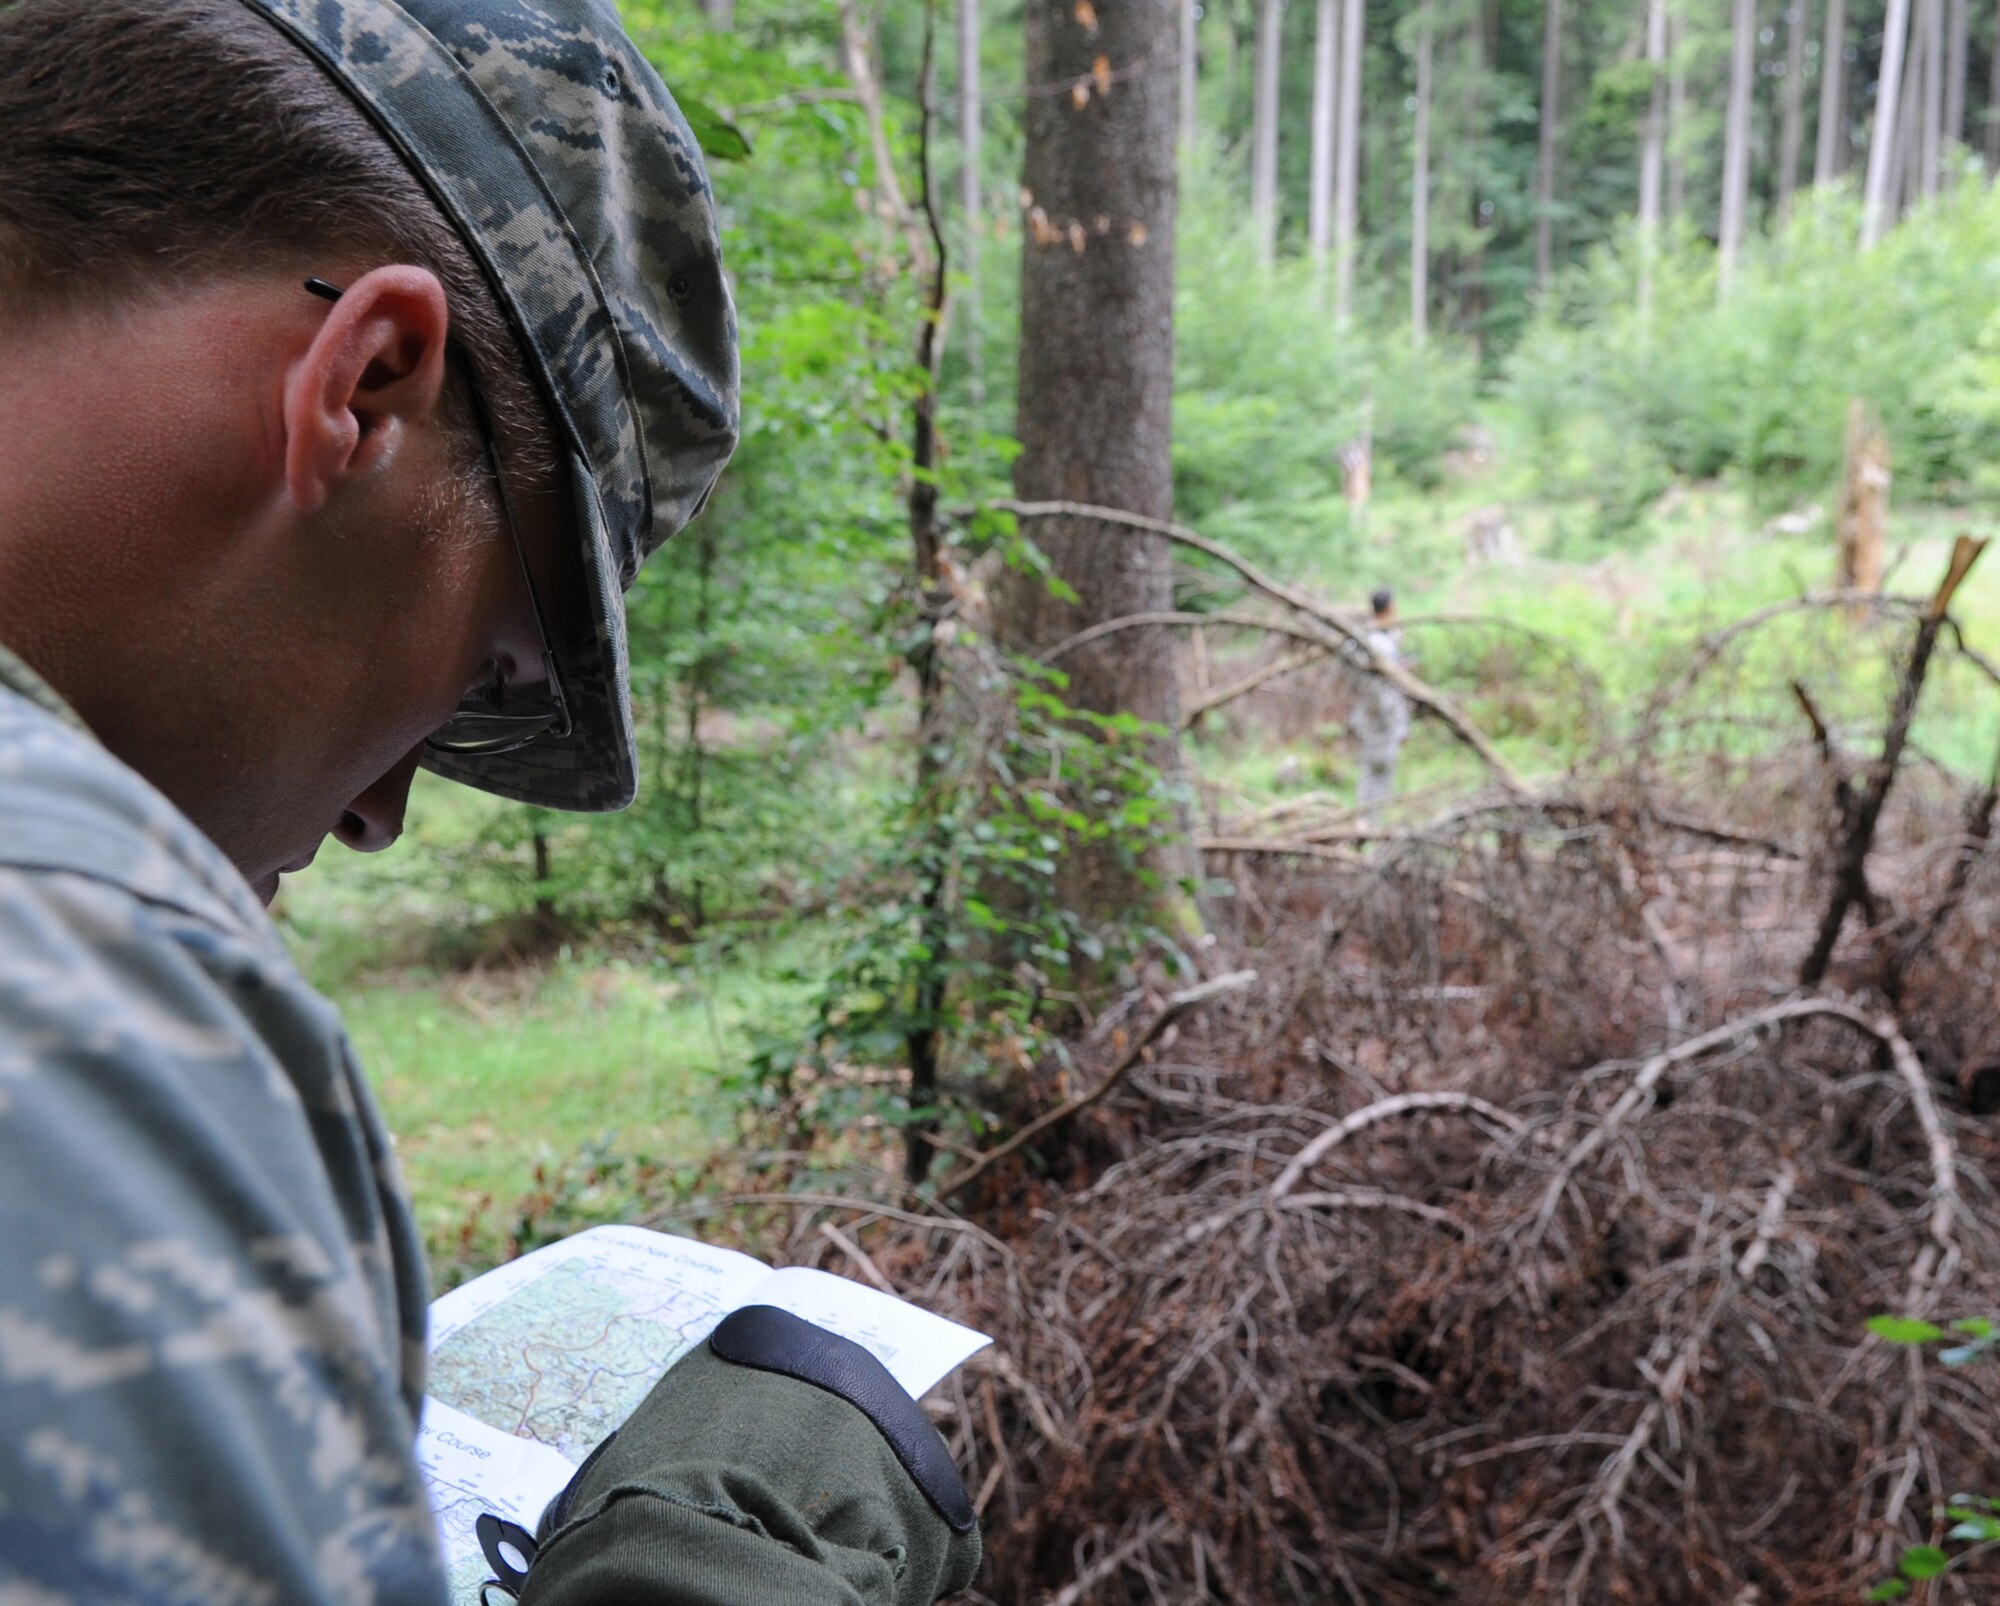 U.S. 1st Lt. John Dunn, 4th Air Support Operations Group intelligence officer from Camel Barracks Heidelberg, checks grids on a map for a land navigation course during exercise ALLIED STRIKE 10, Grafenwoehr, Germany, July 25, 2010. AS 10 is Europe's premier close air support (CAS) exercise, held annually to conduct robust, realistic CAS training that helps build partnership capacity among allied North Atlantic Treaty Organization nations and joint services while refining the latest operational CAS tactics. For more ALLIED STRIKE information go to www.usafe.af.mil/alliedstrike.asp. (U.S. Air Force photo by Senior Airman Caleb Pierce)